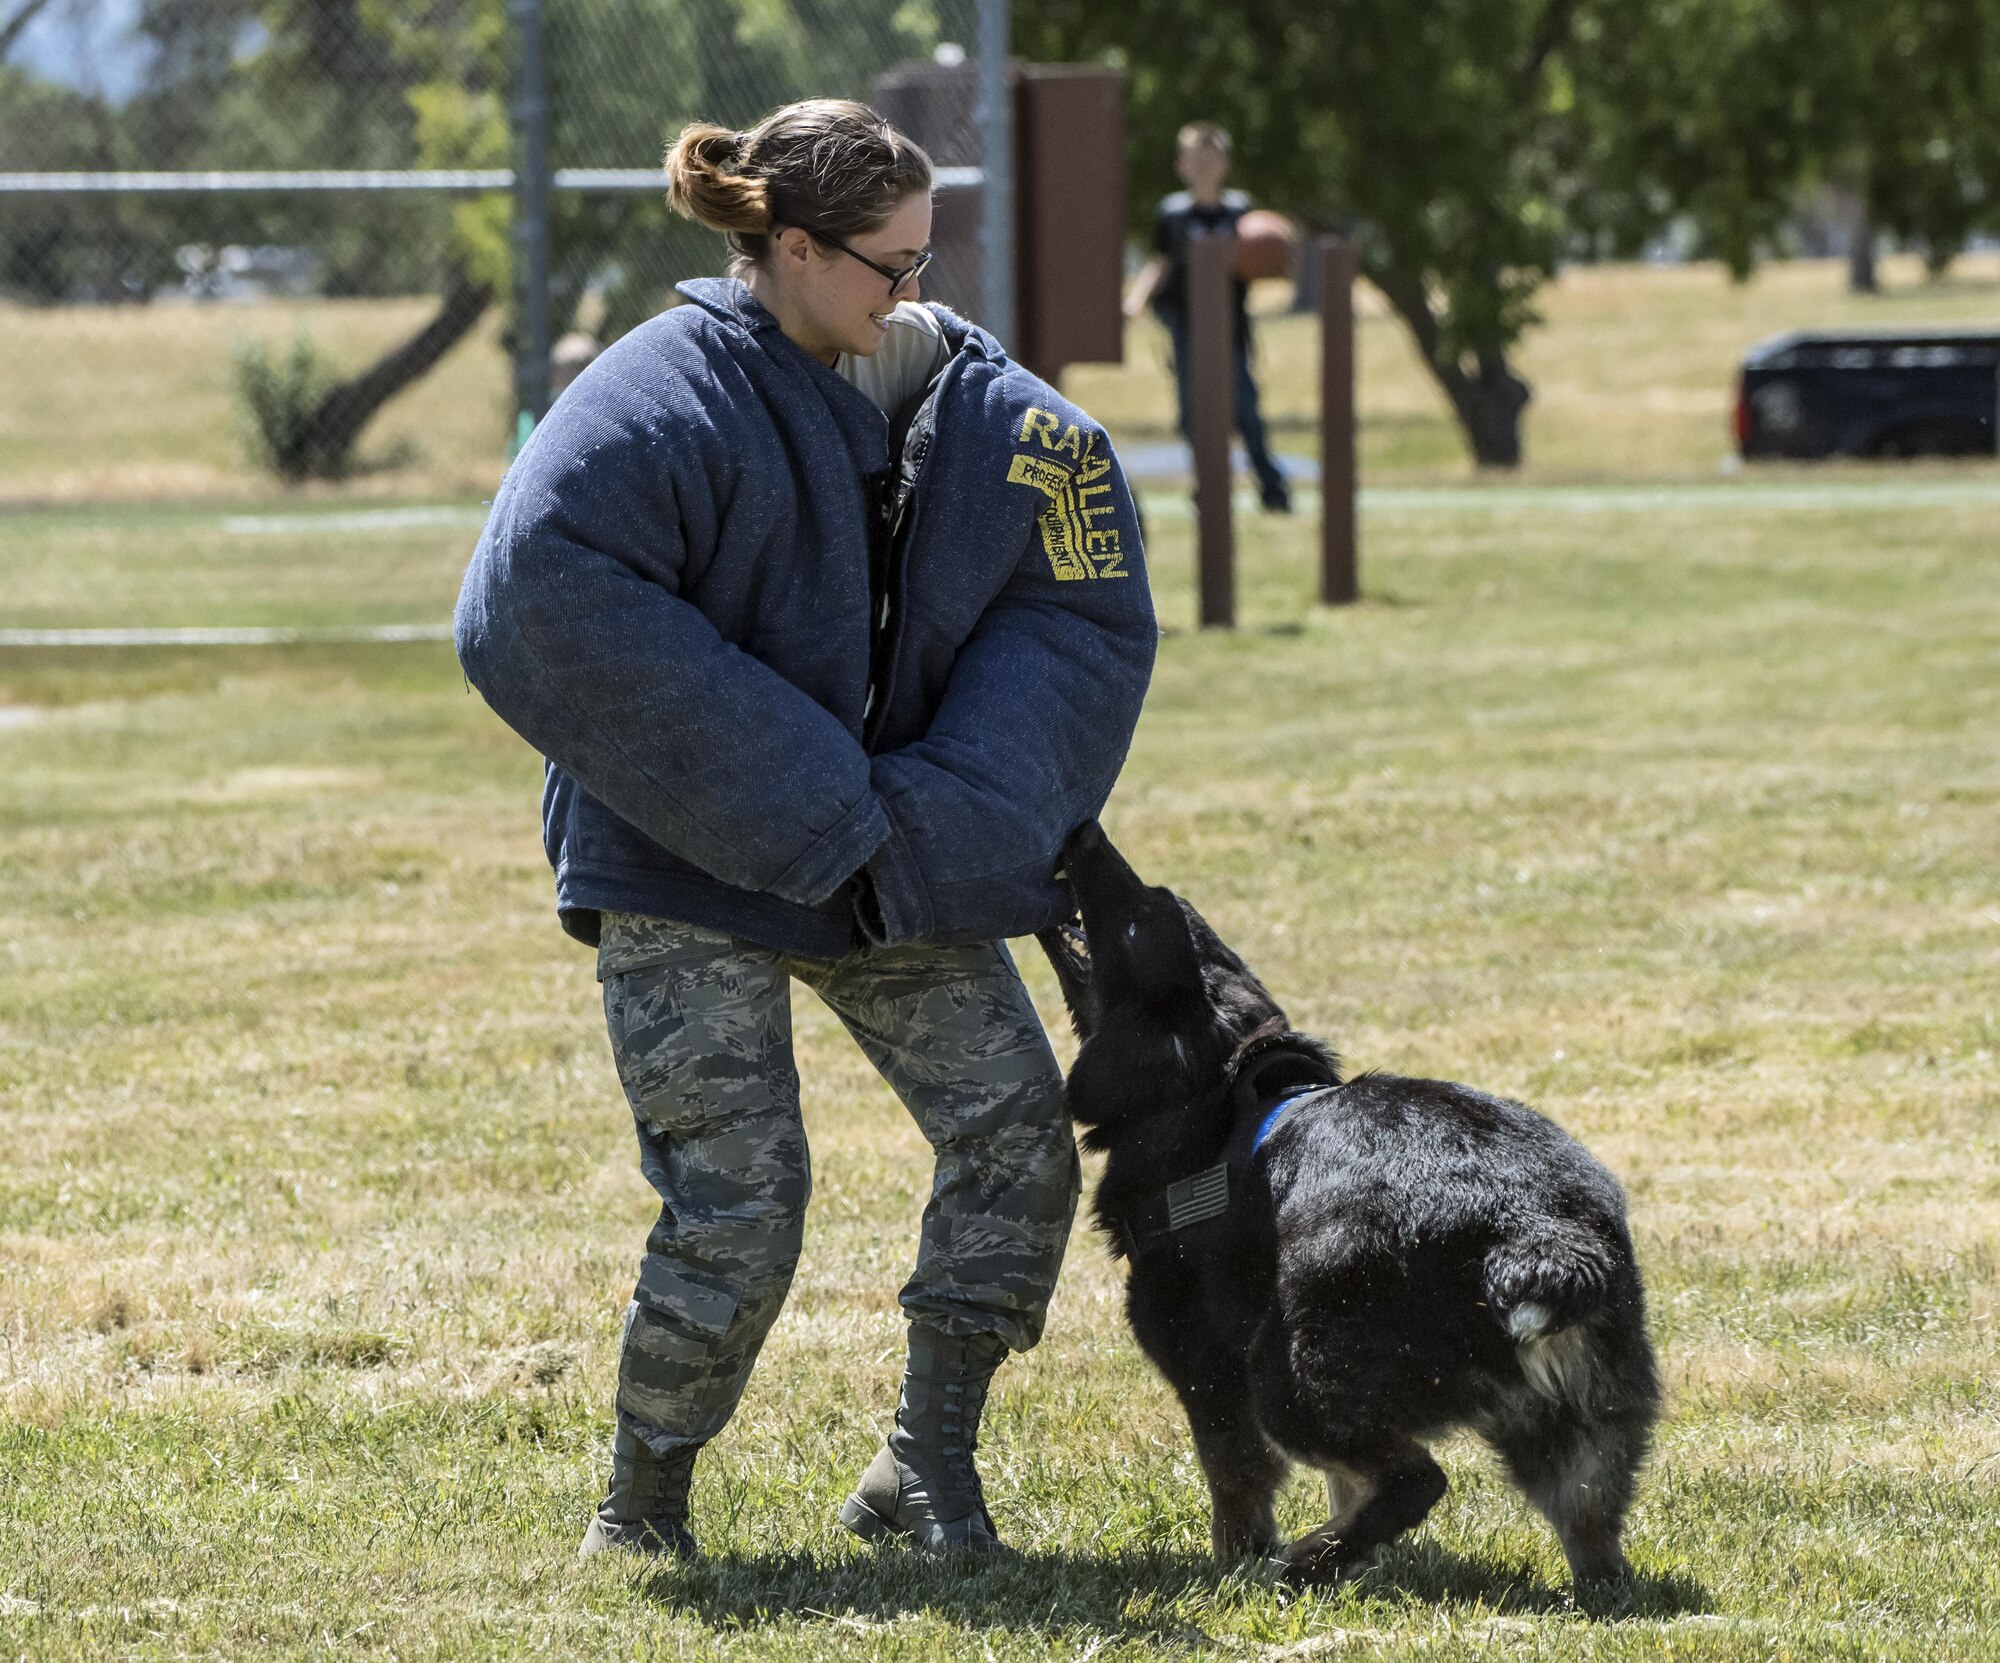 Bessy, a 60th Security Forces Squadron military working dog, stops the “bad guy” or in this case the "bad girl", in her tracks as part of a demonstration during the National Police Week Picnic May 17, 2017 at Travis Air Force Base, Calif. Established by a joint resolution of Congress in 1962, National Police Week pays special recognition to law enforcement officers who have lost their lives in the line of duty for the safety and protection of others. Police Week gives the 60th SFS an opportunity to inform, educate and strengthen Travis community relations. (U.S. Air Force photo/ Heide Couch)